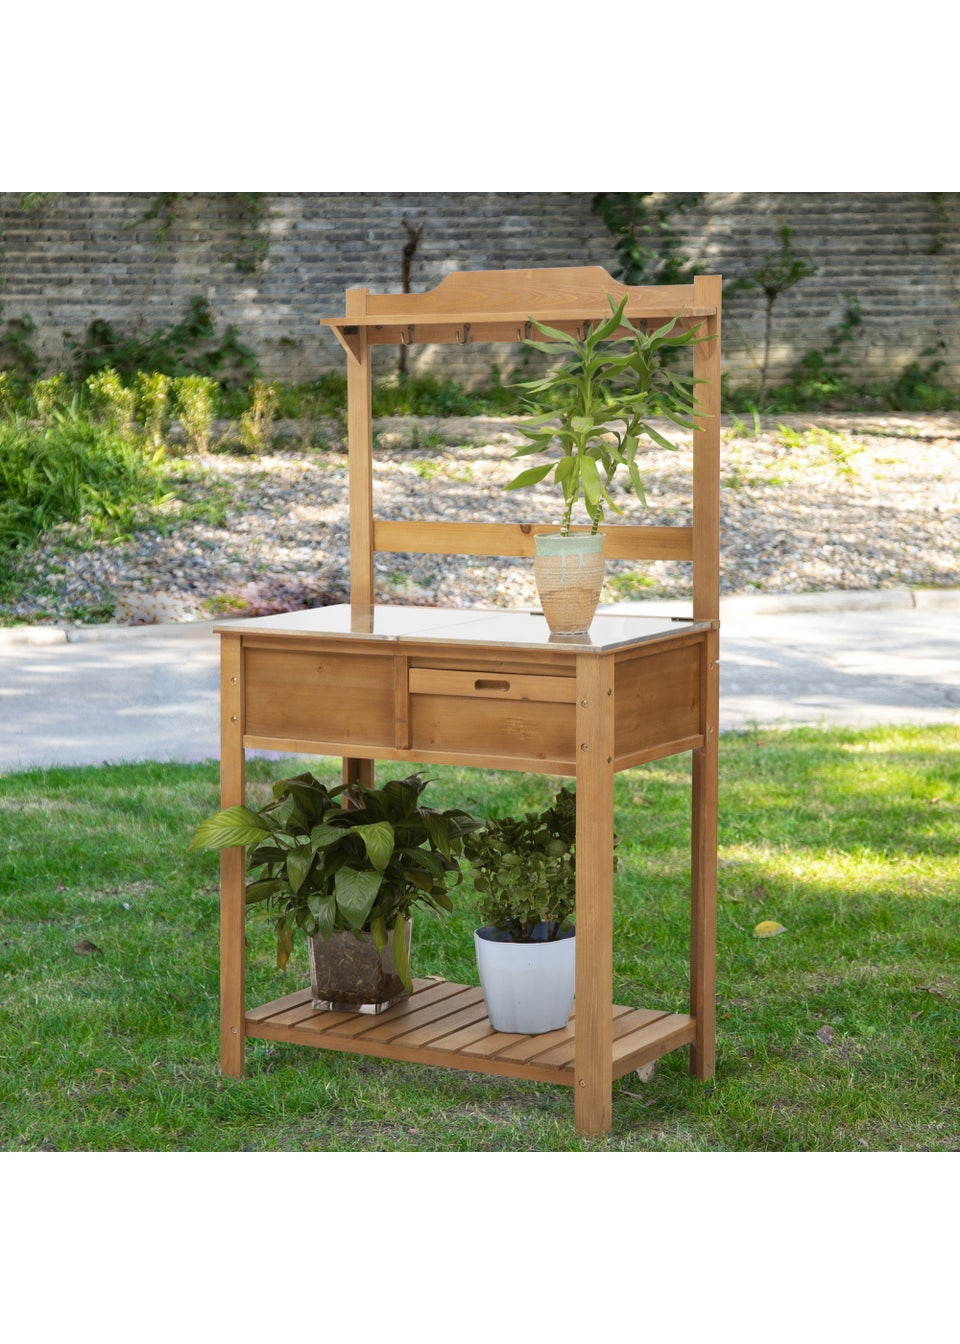 Outsunny Wooden Spacious Garden Potting Bench with Large Storage Space 80L x 42W x 142H cm